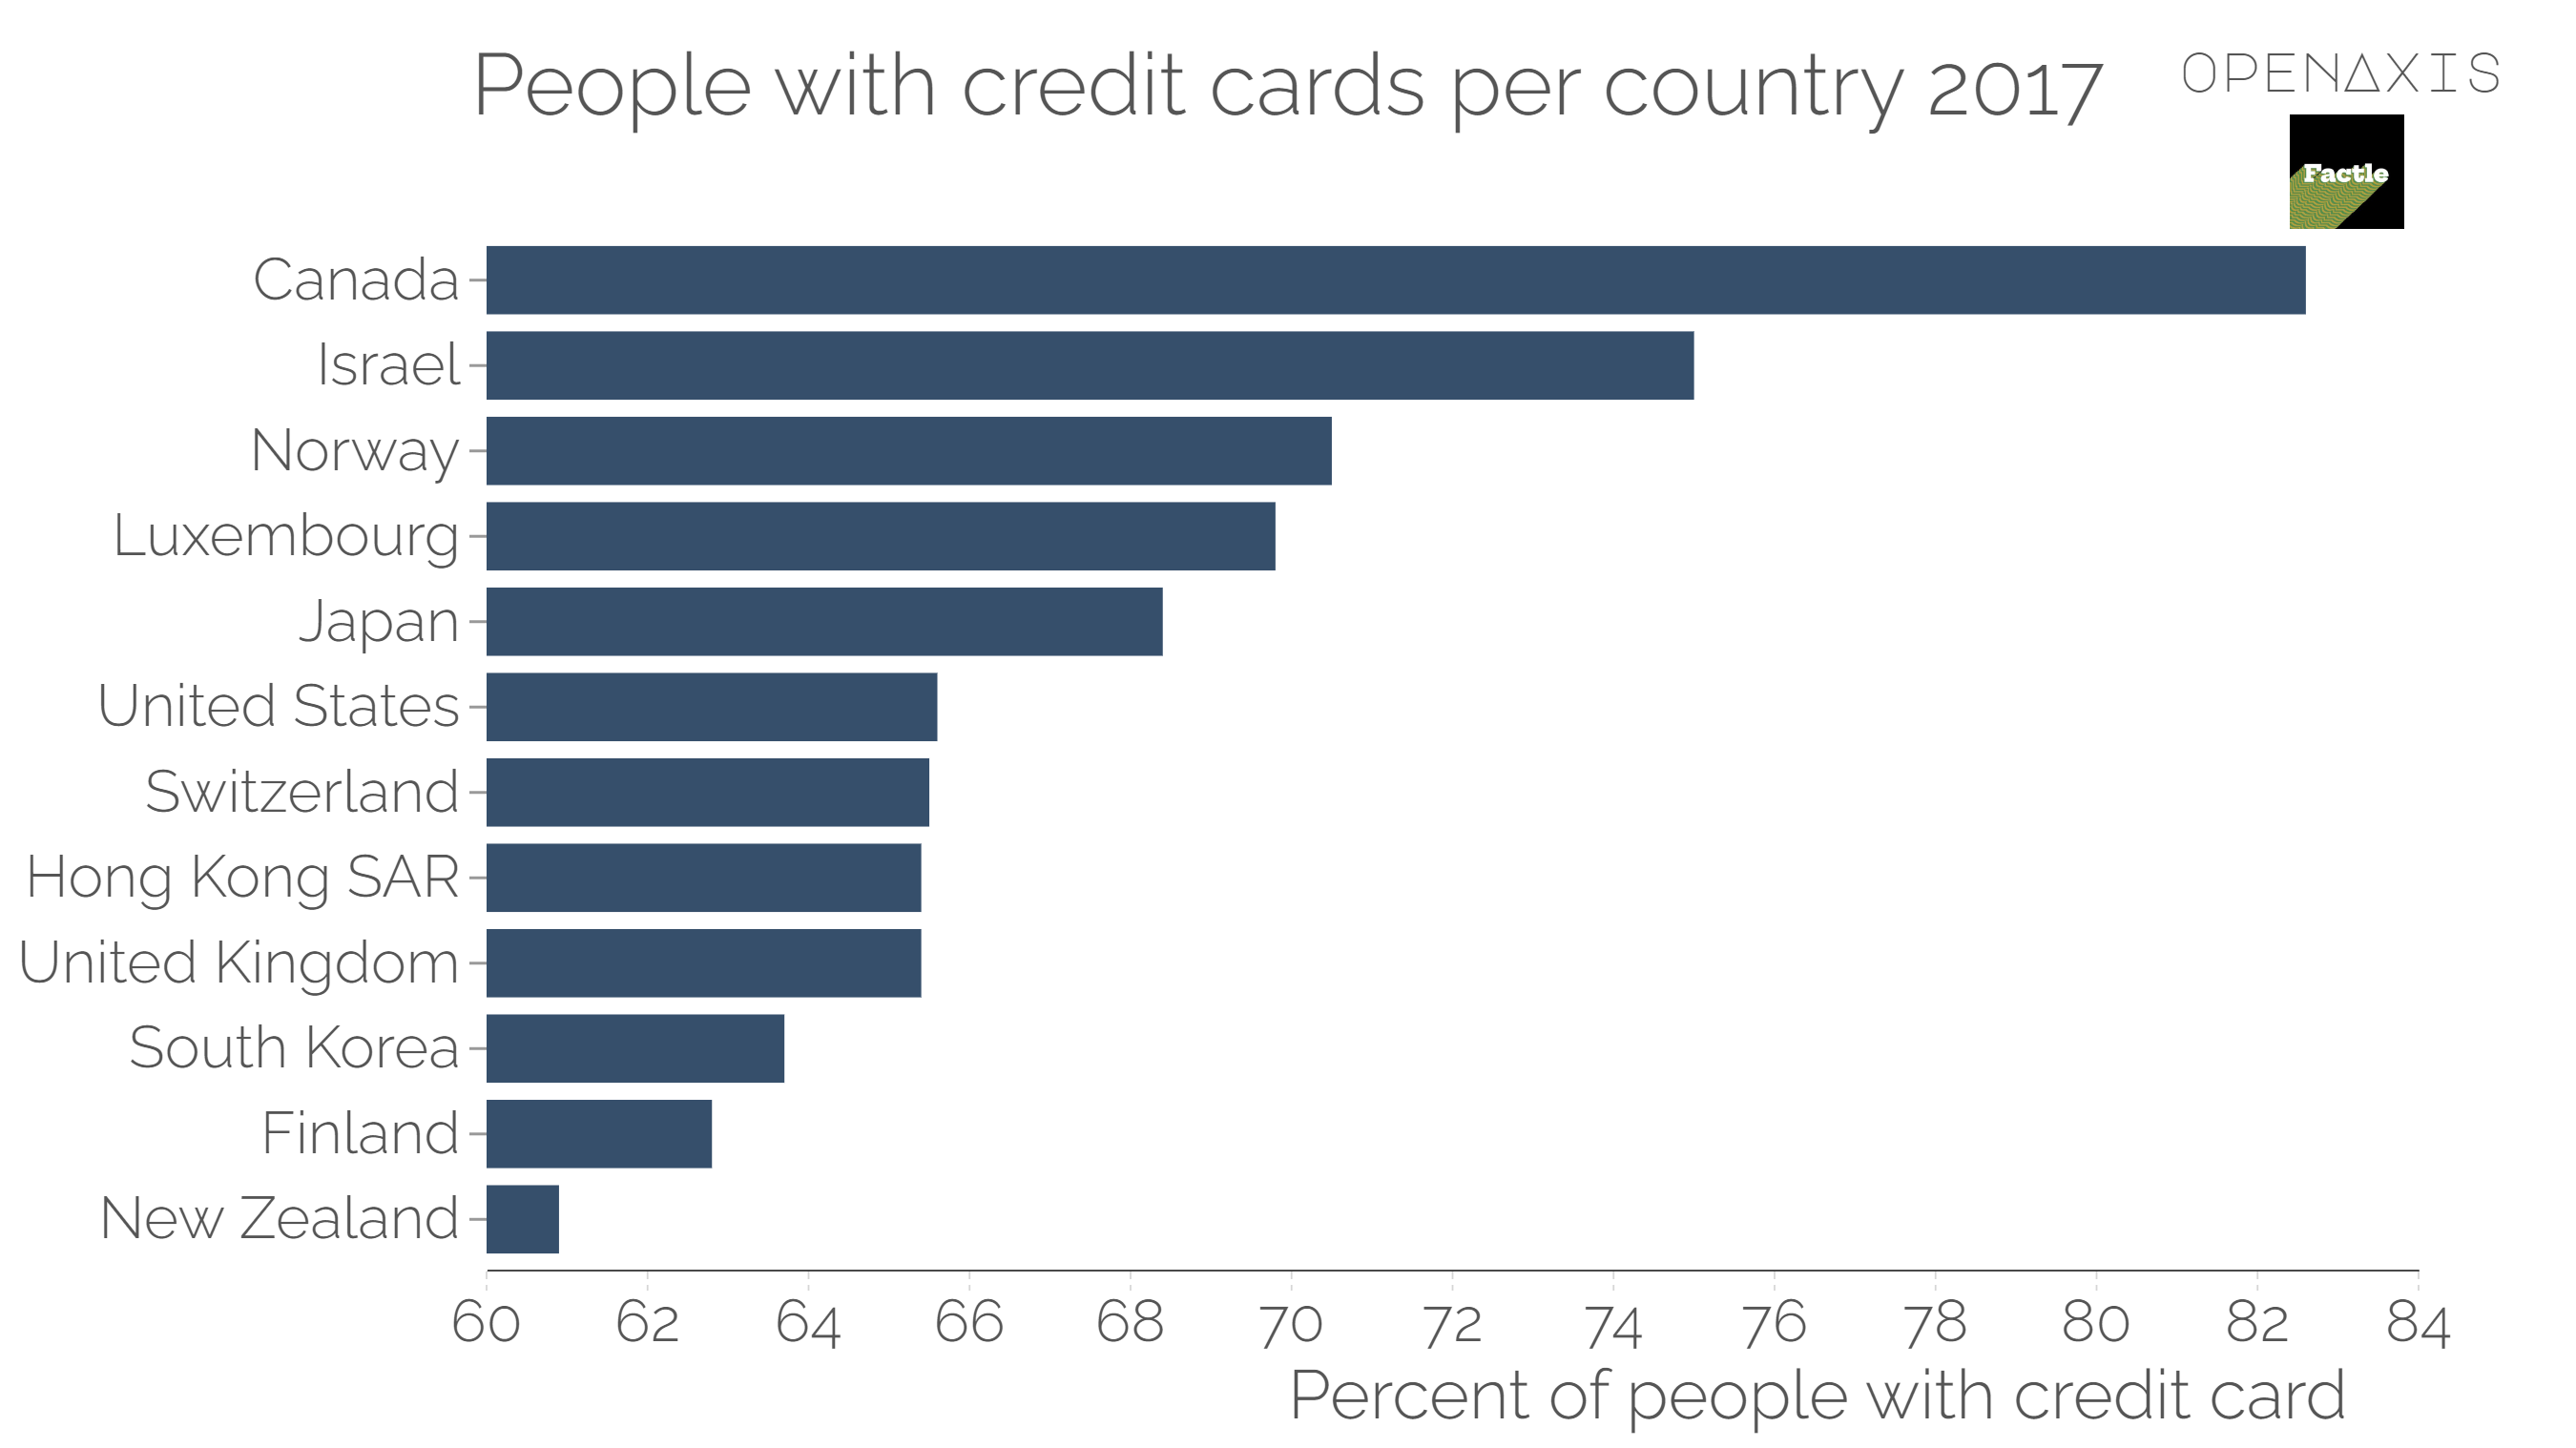 "People with credit cards per country 2017"